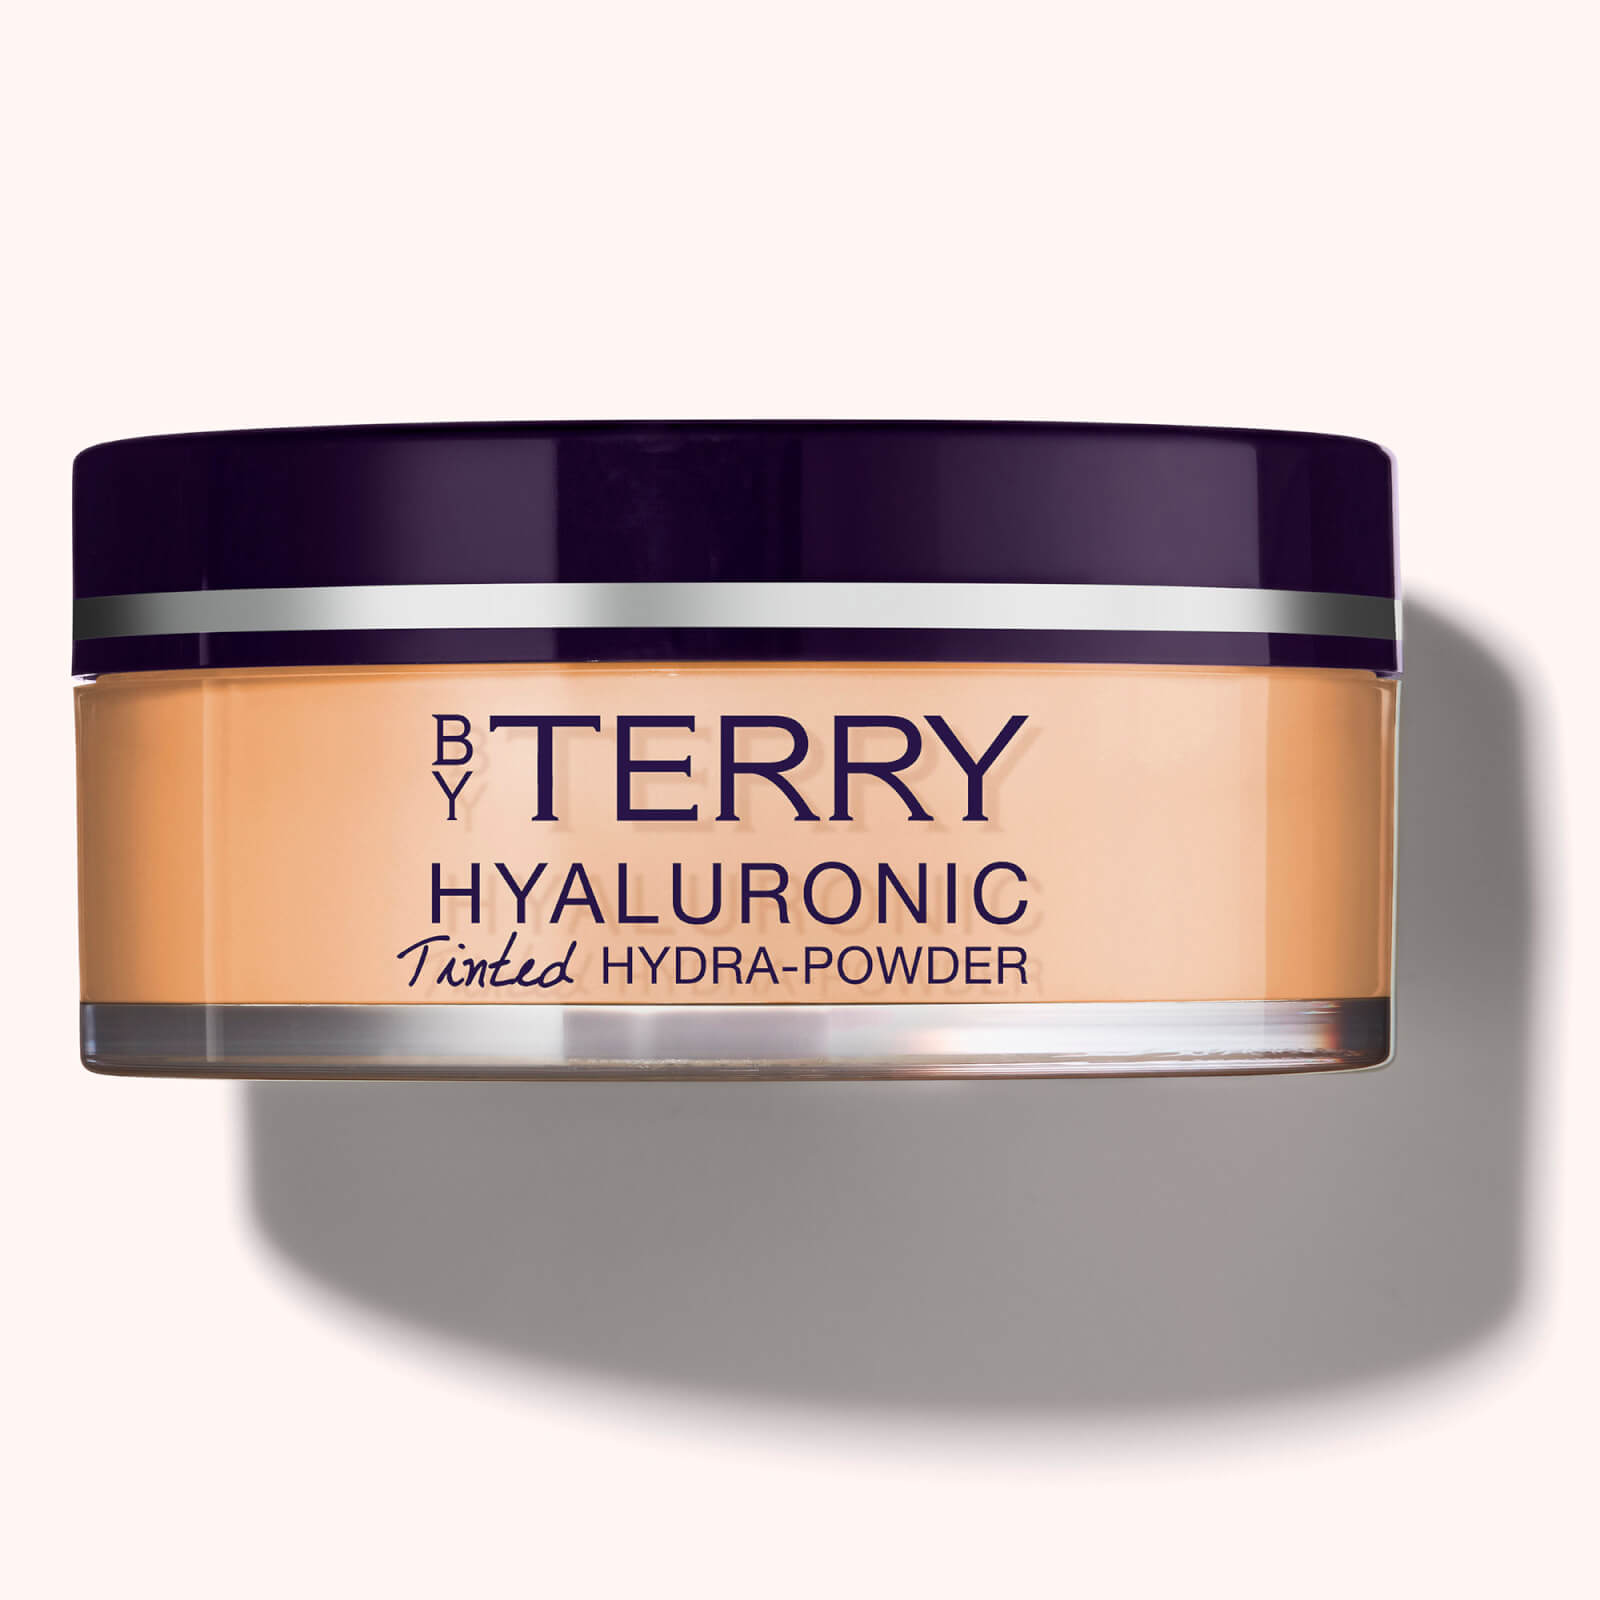 By Terry Hyaluronic Tinted Hydra-powder (10 G.) In N2. Apricot Light